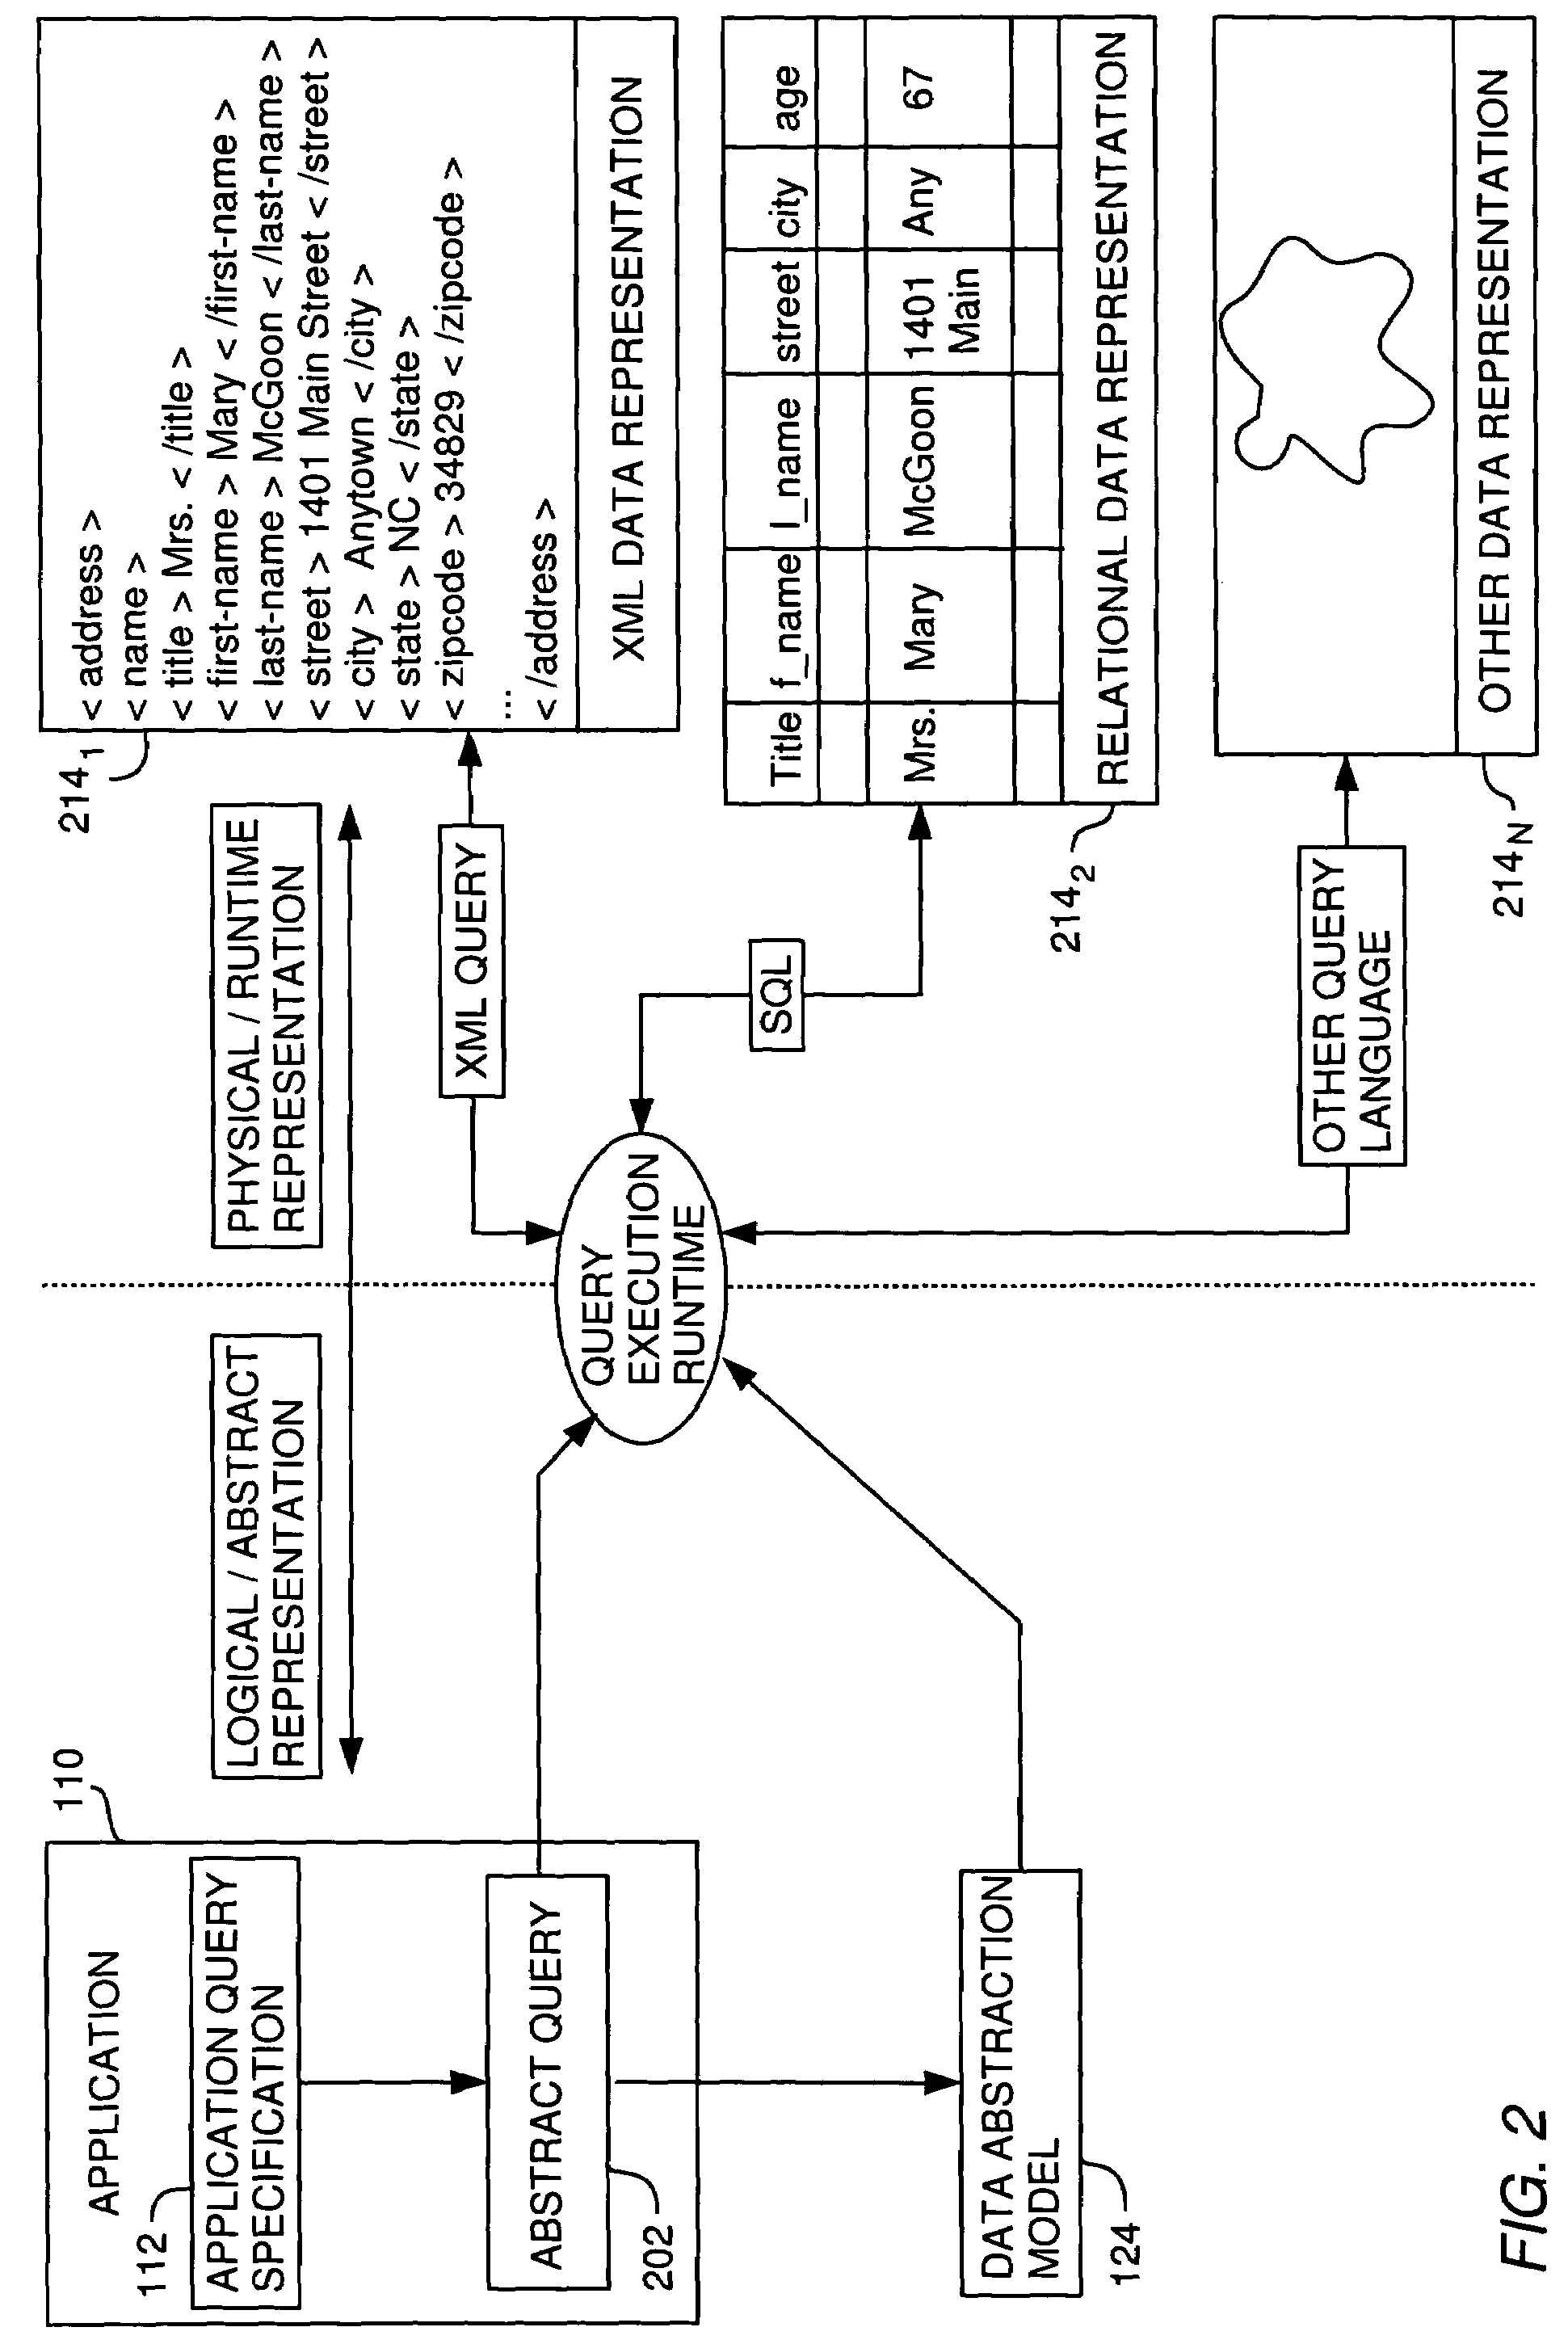 Methods, systems and articles of manufacture for abstract query building with selectability of aggregation operations and grouping